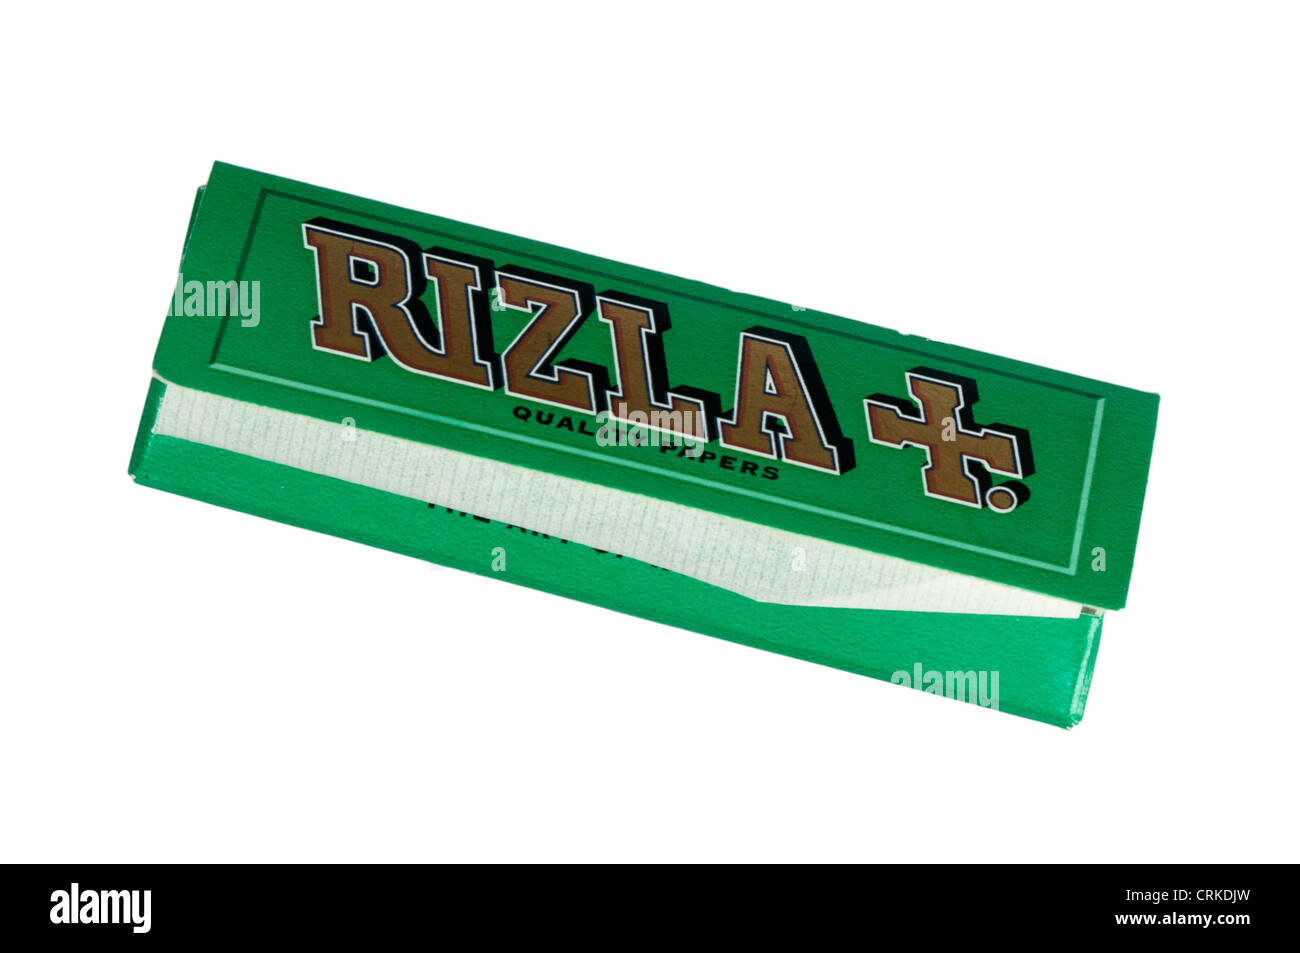 Packet Pack Of Rizla Cigarette Papers Rizlas Stock Photo - Alamy